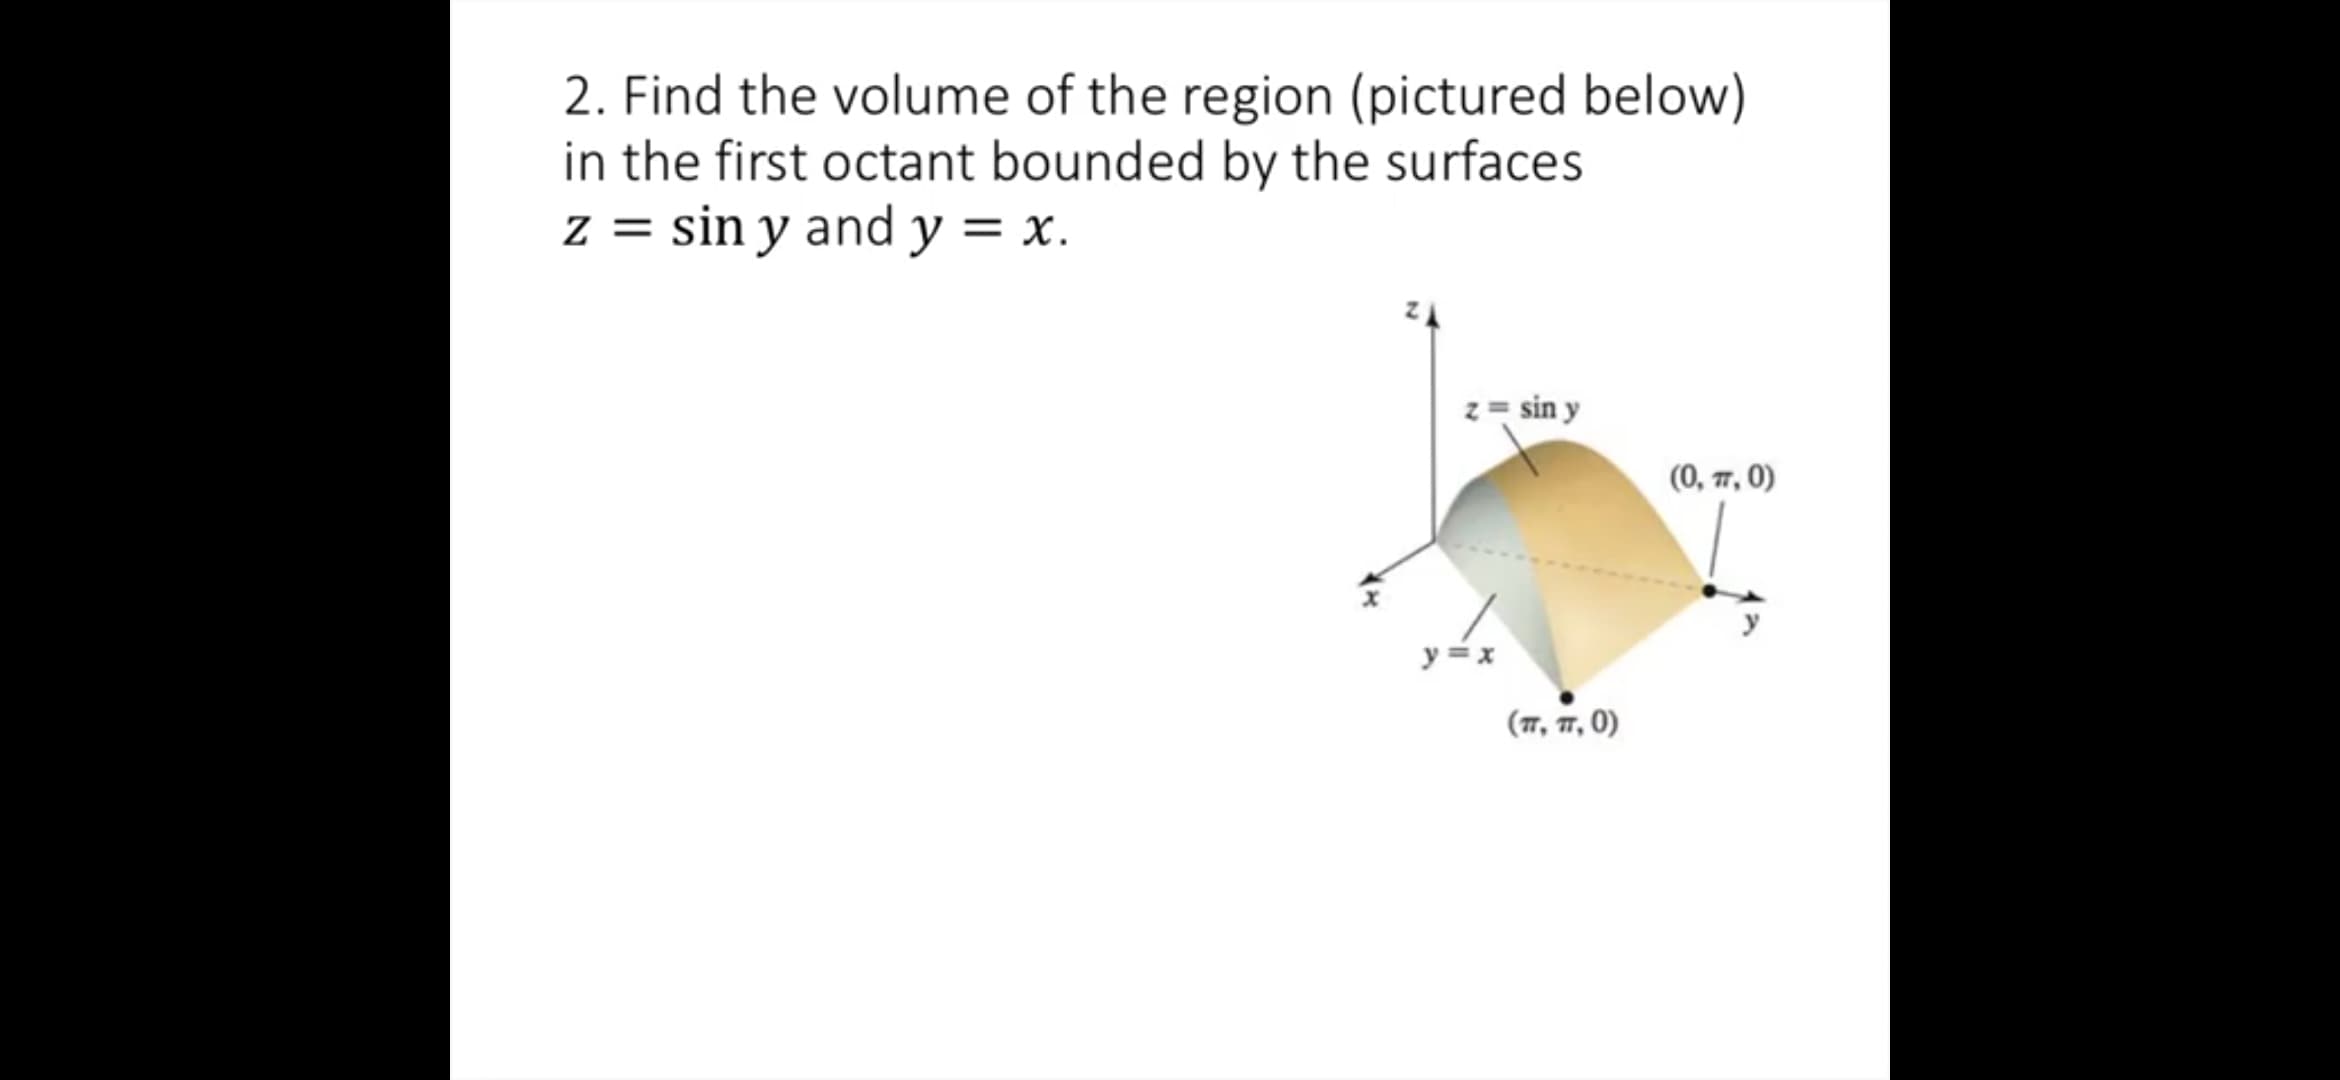 2. Find the volume of the region (pictured below)
in the first octant bounded by the surfaces
z = sin y and y = x.
z = sin y
(0, 77, 0)
y = x
(17, 17, 0)
